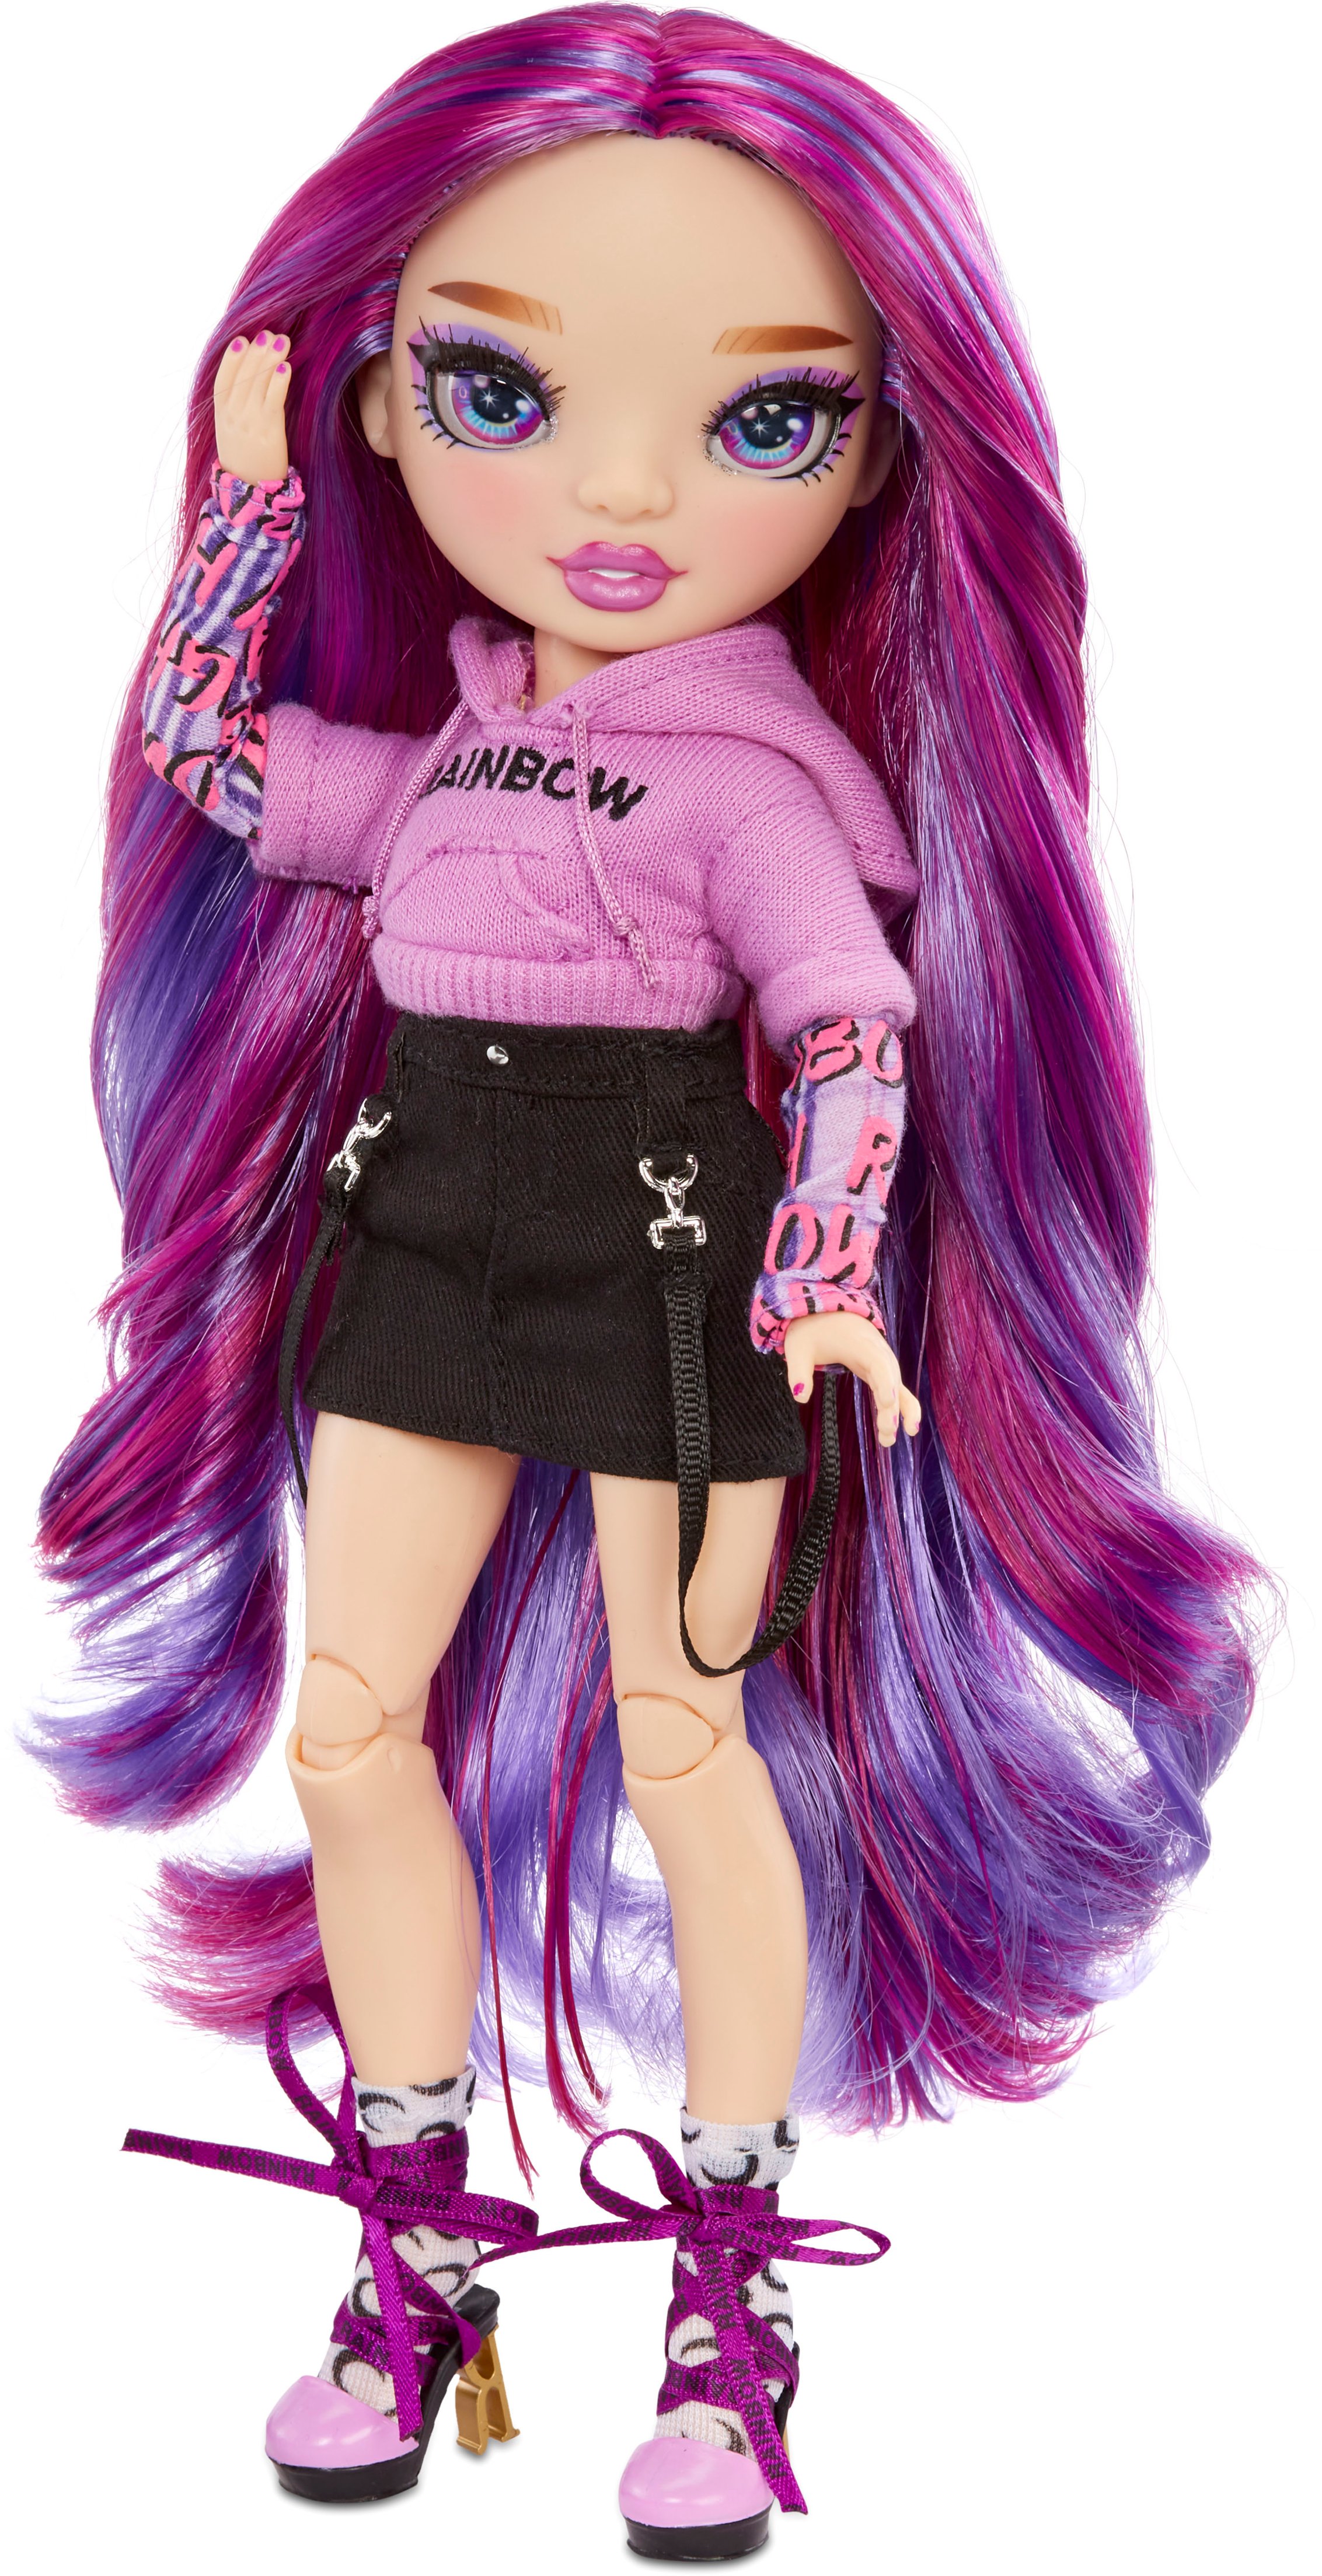 Rainbow High Series 3 EMI Vanda Fashion Doll – Orchid (Deep Purple) with 2  Designer Outfits to Mix & Match with Accessories, Gift for Kids and